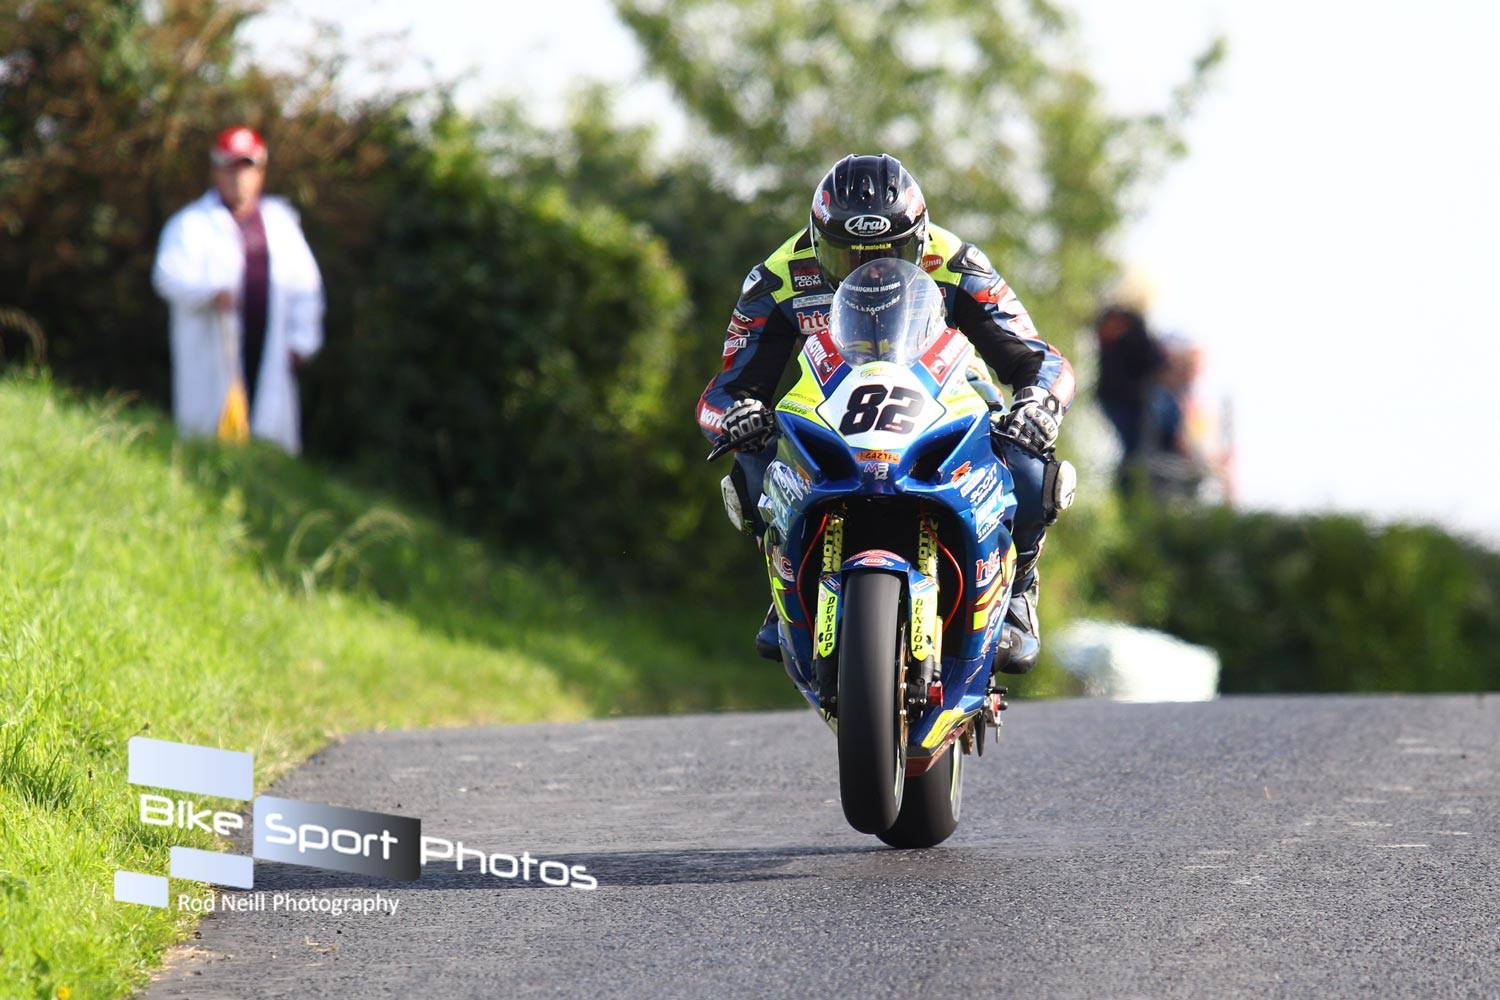 Country Crest Support Banked For Skerries Return